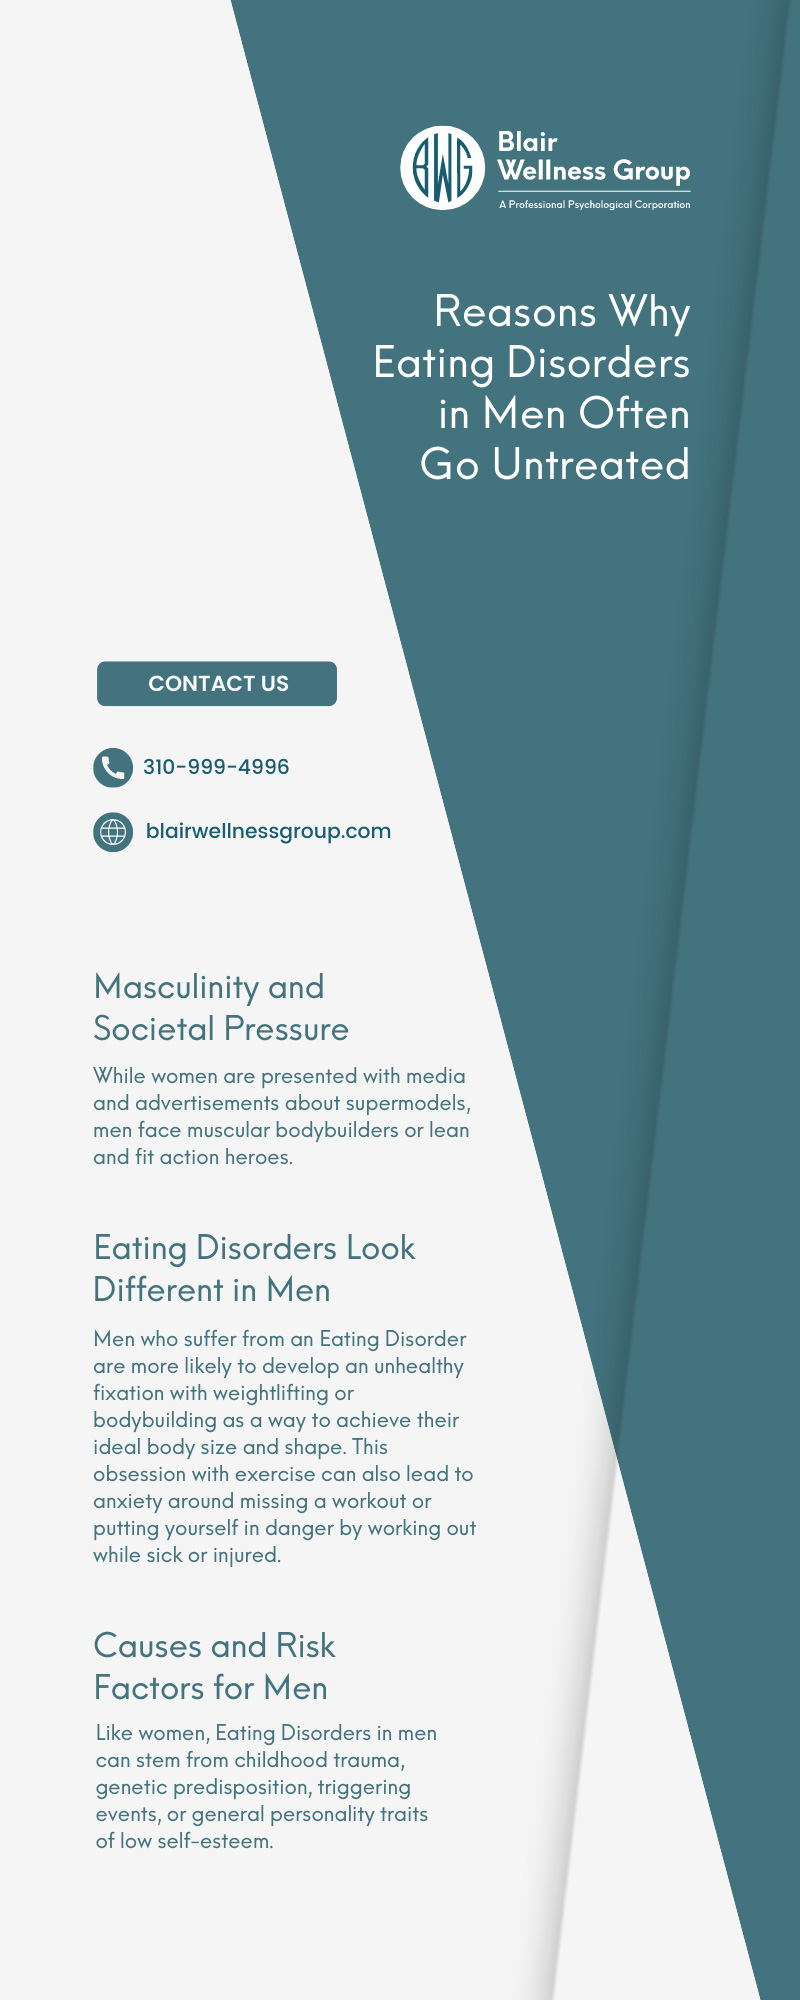 Reasons Why Eating Disorders in Men Often Go Untreated